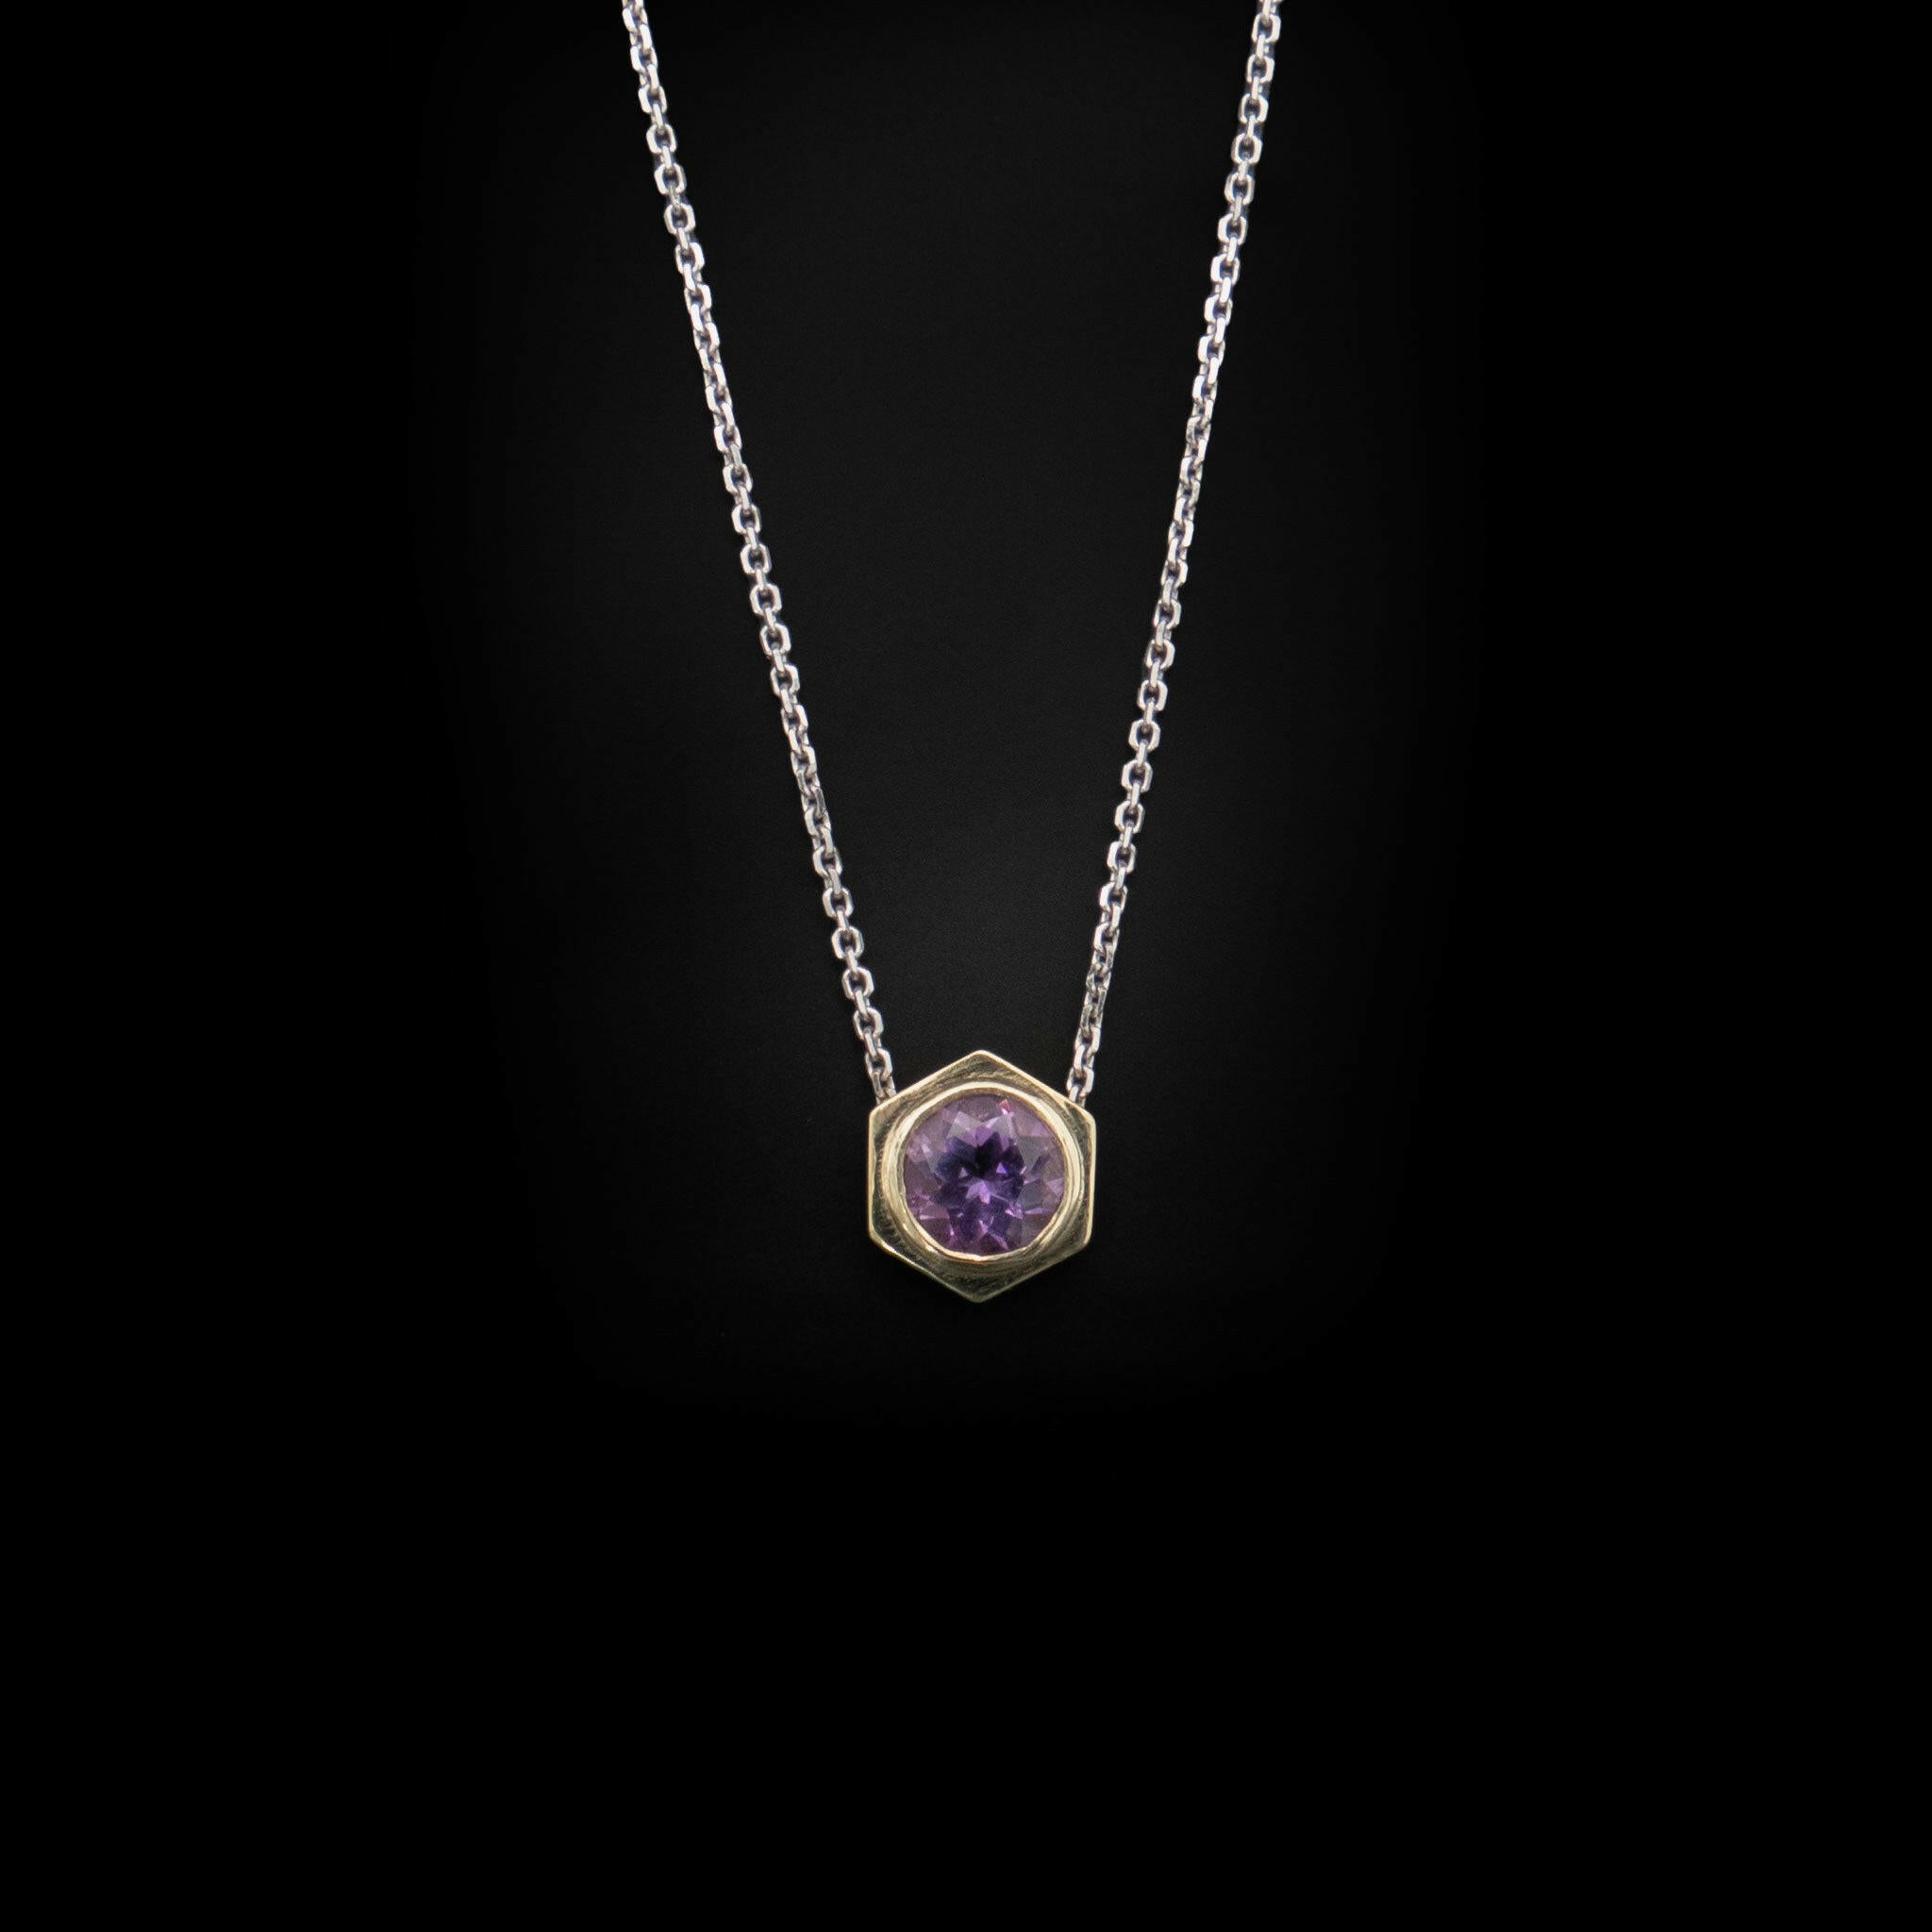 front view of bolt pendant with amethyst